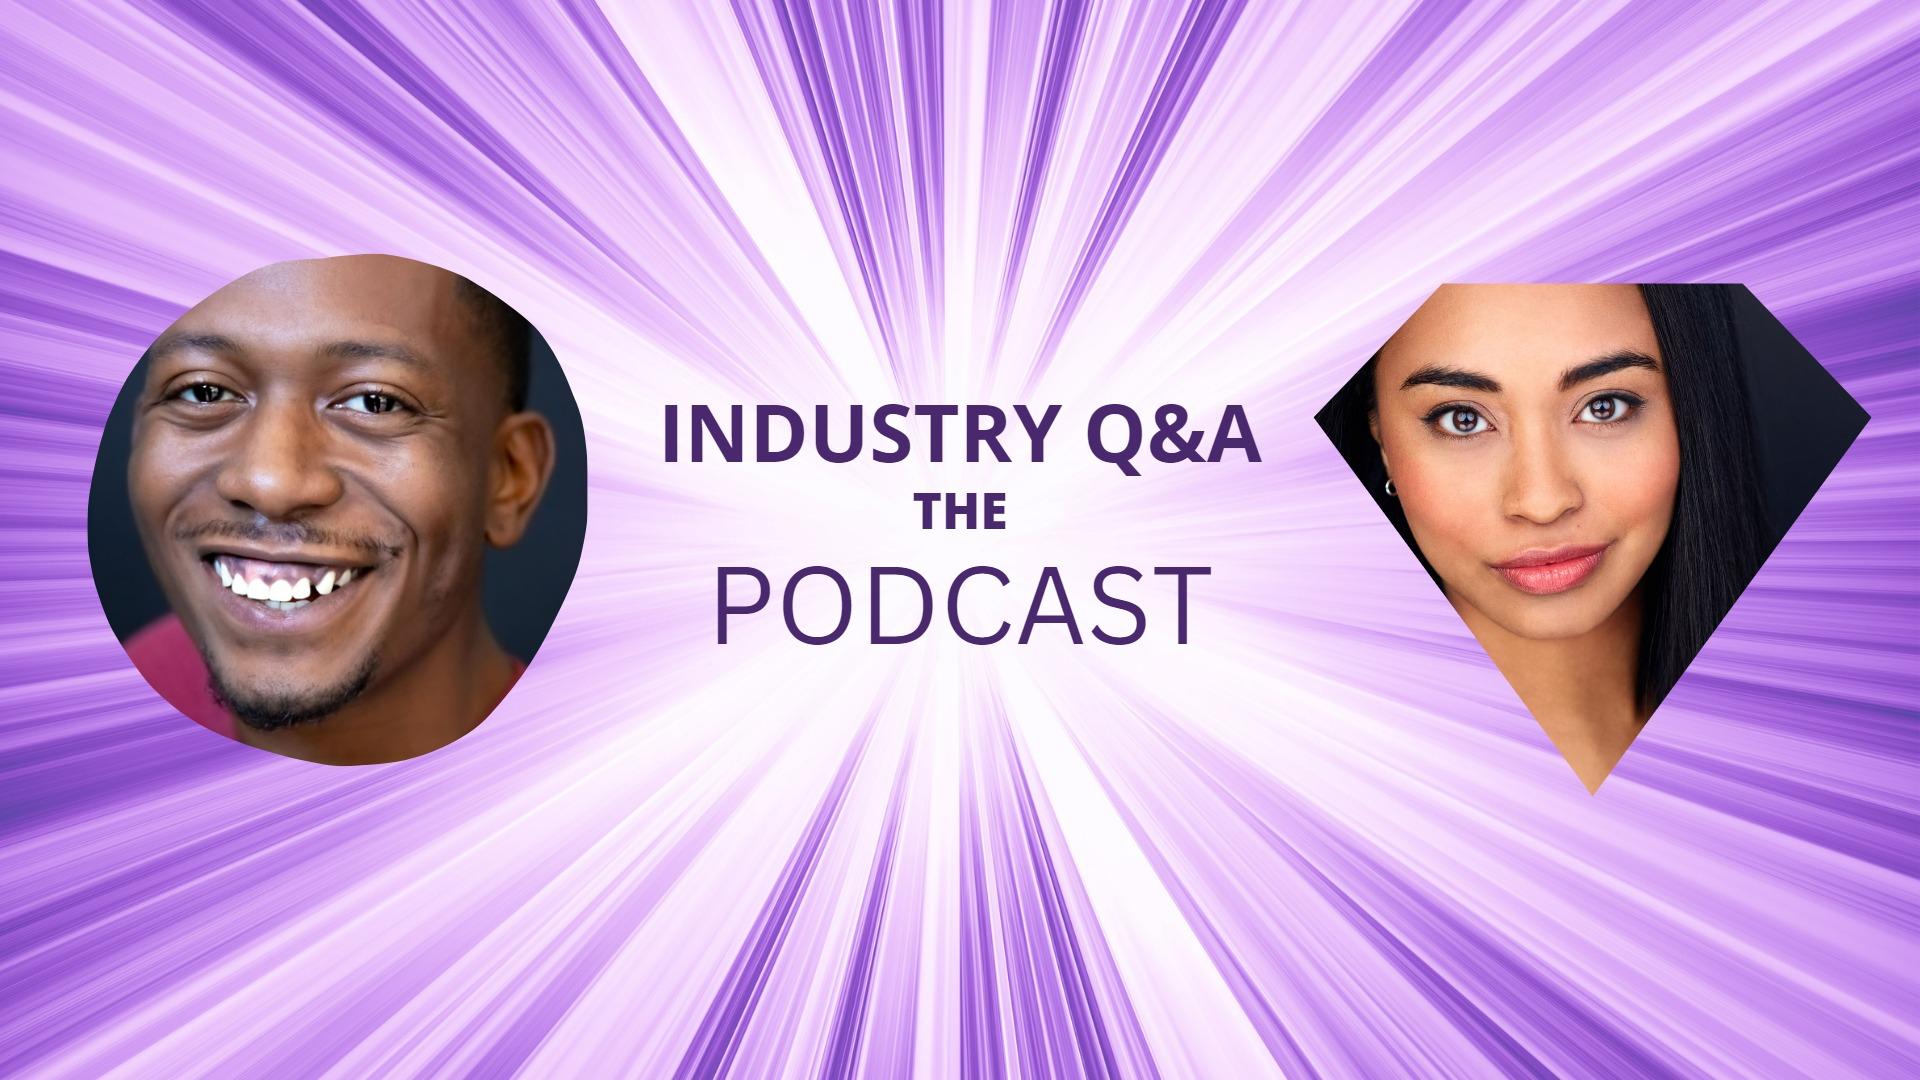 Industry Q&A the Podcast: Ep2 - Imani Youngblood